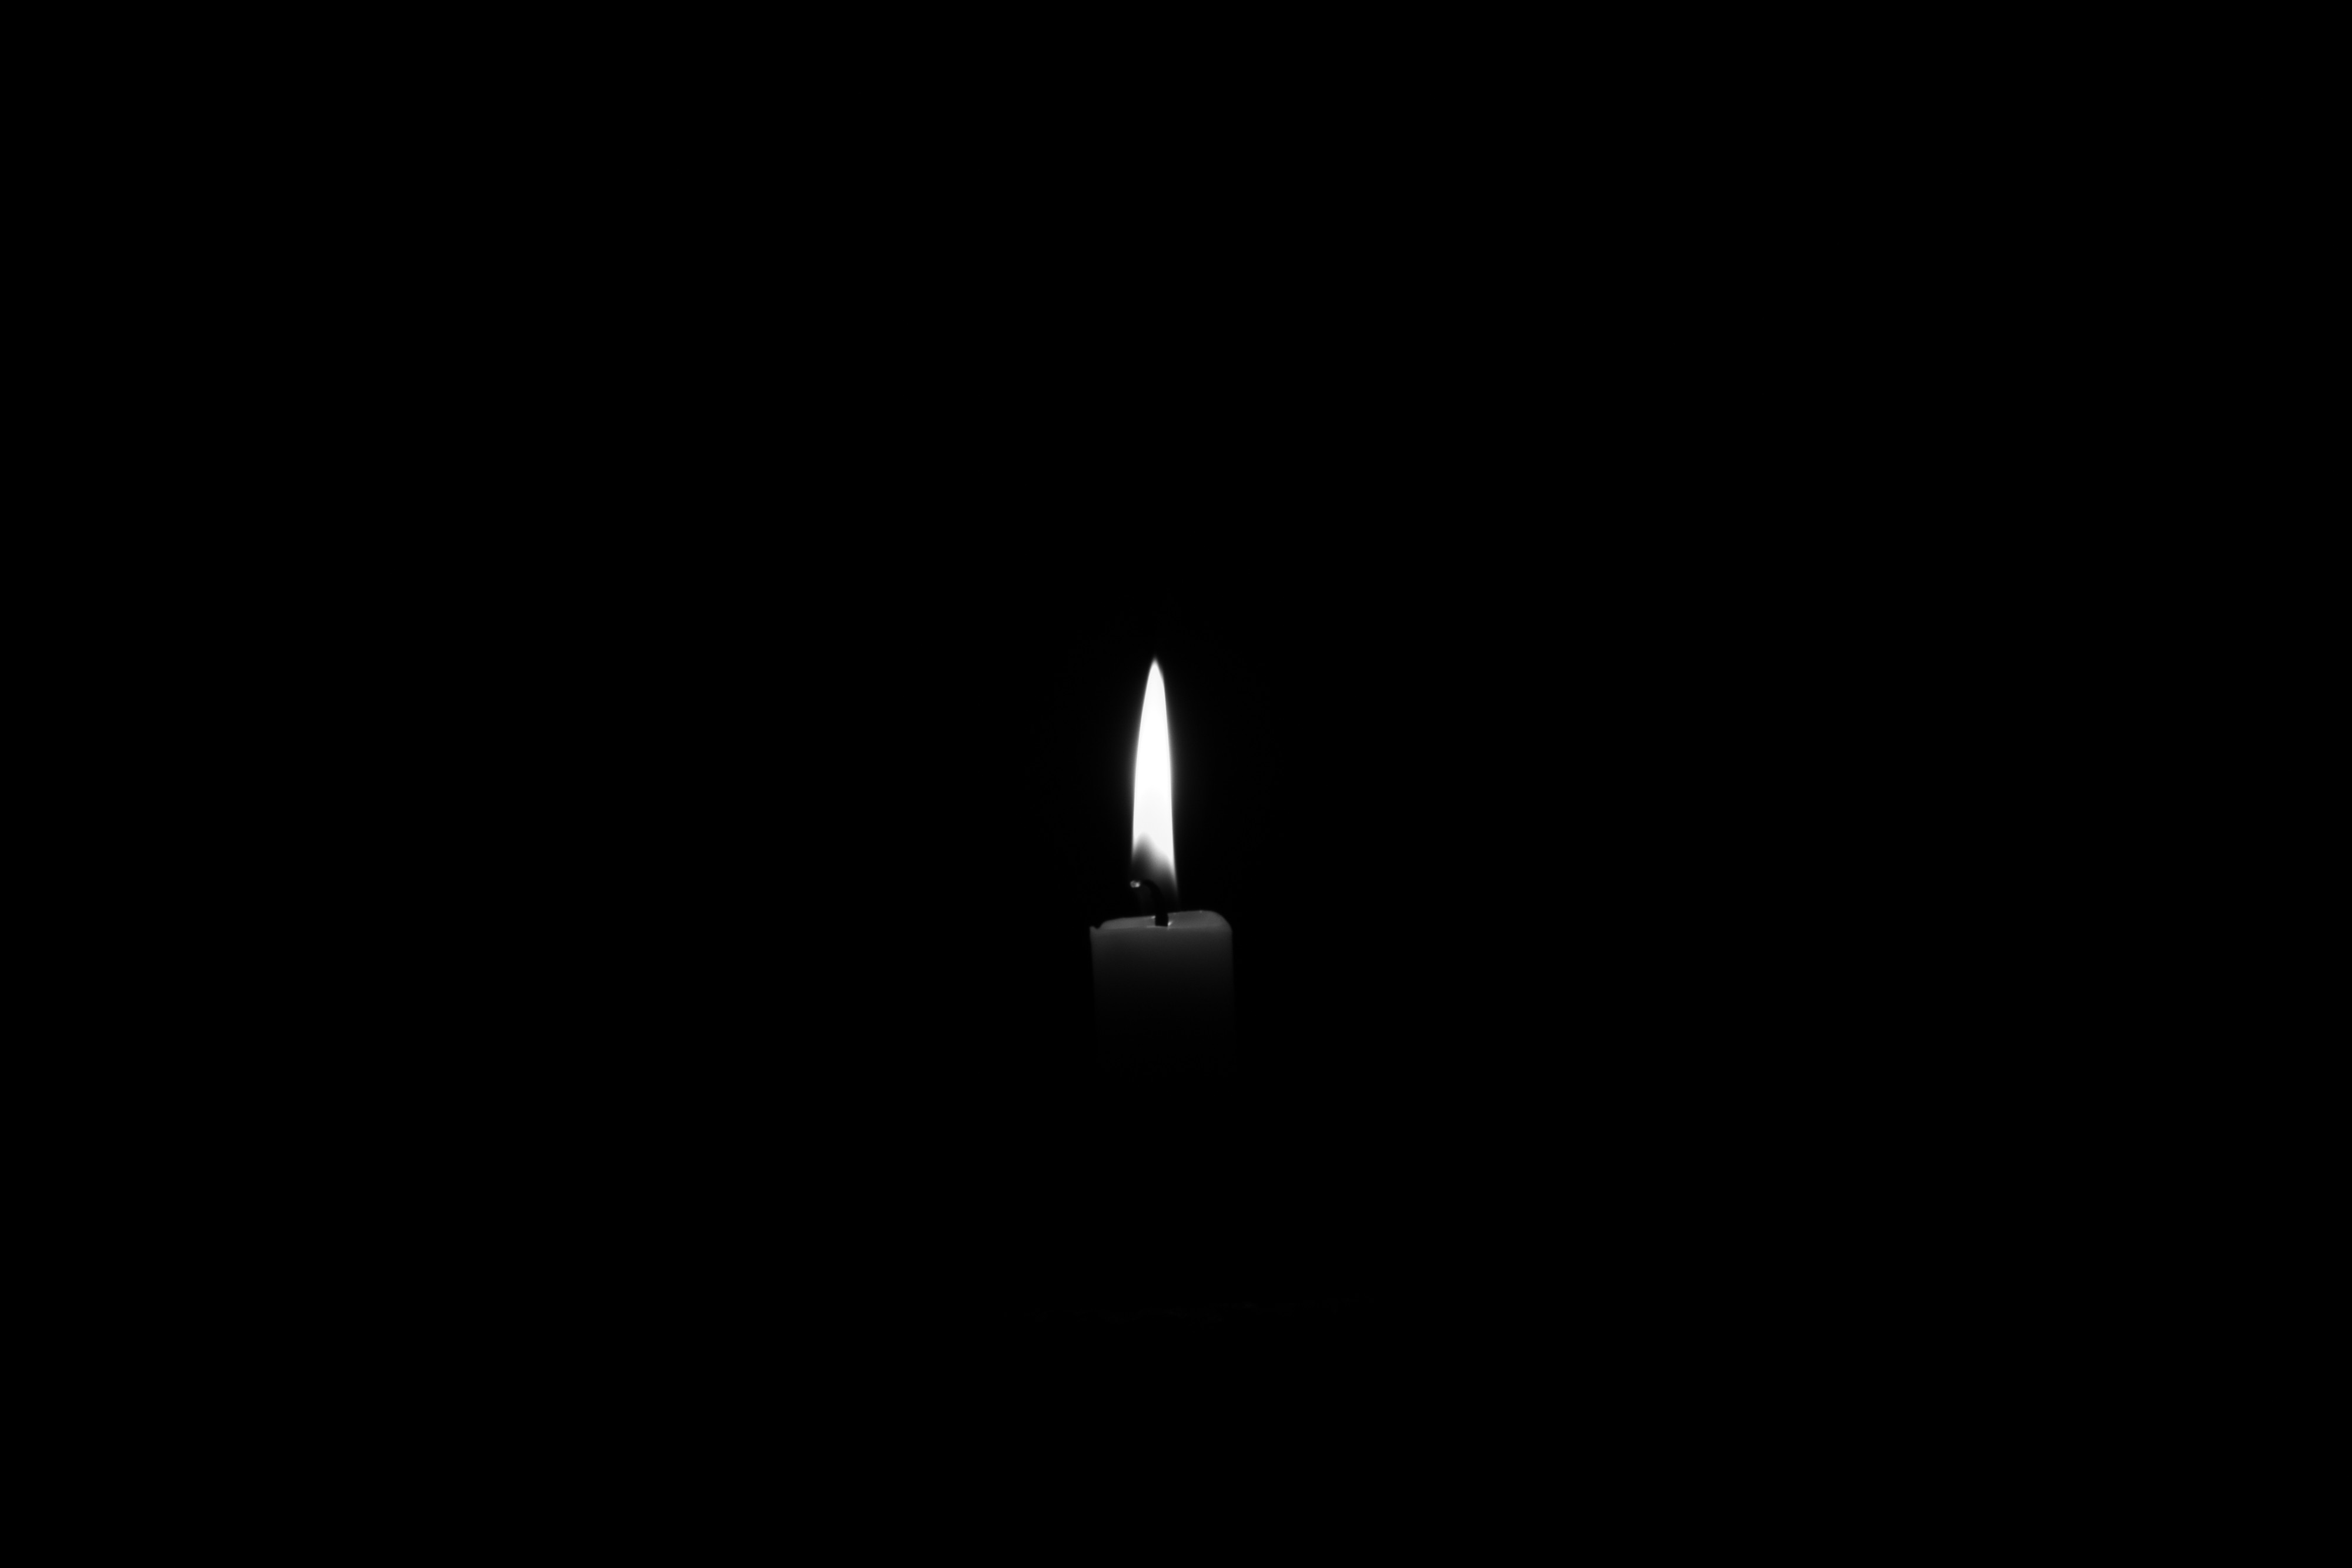 candle, bw, black, flame, chb cellphone